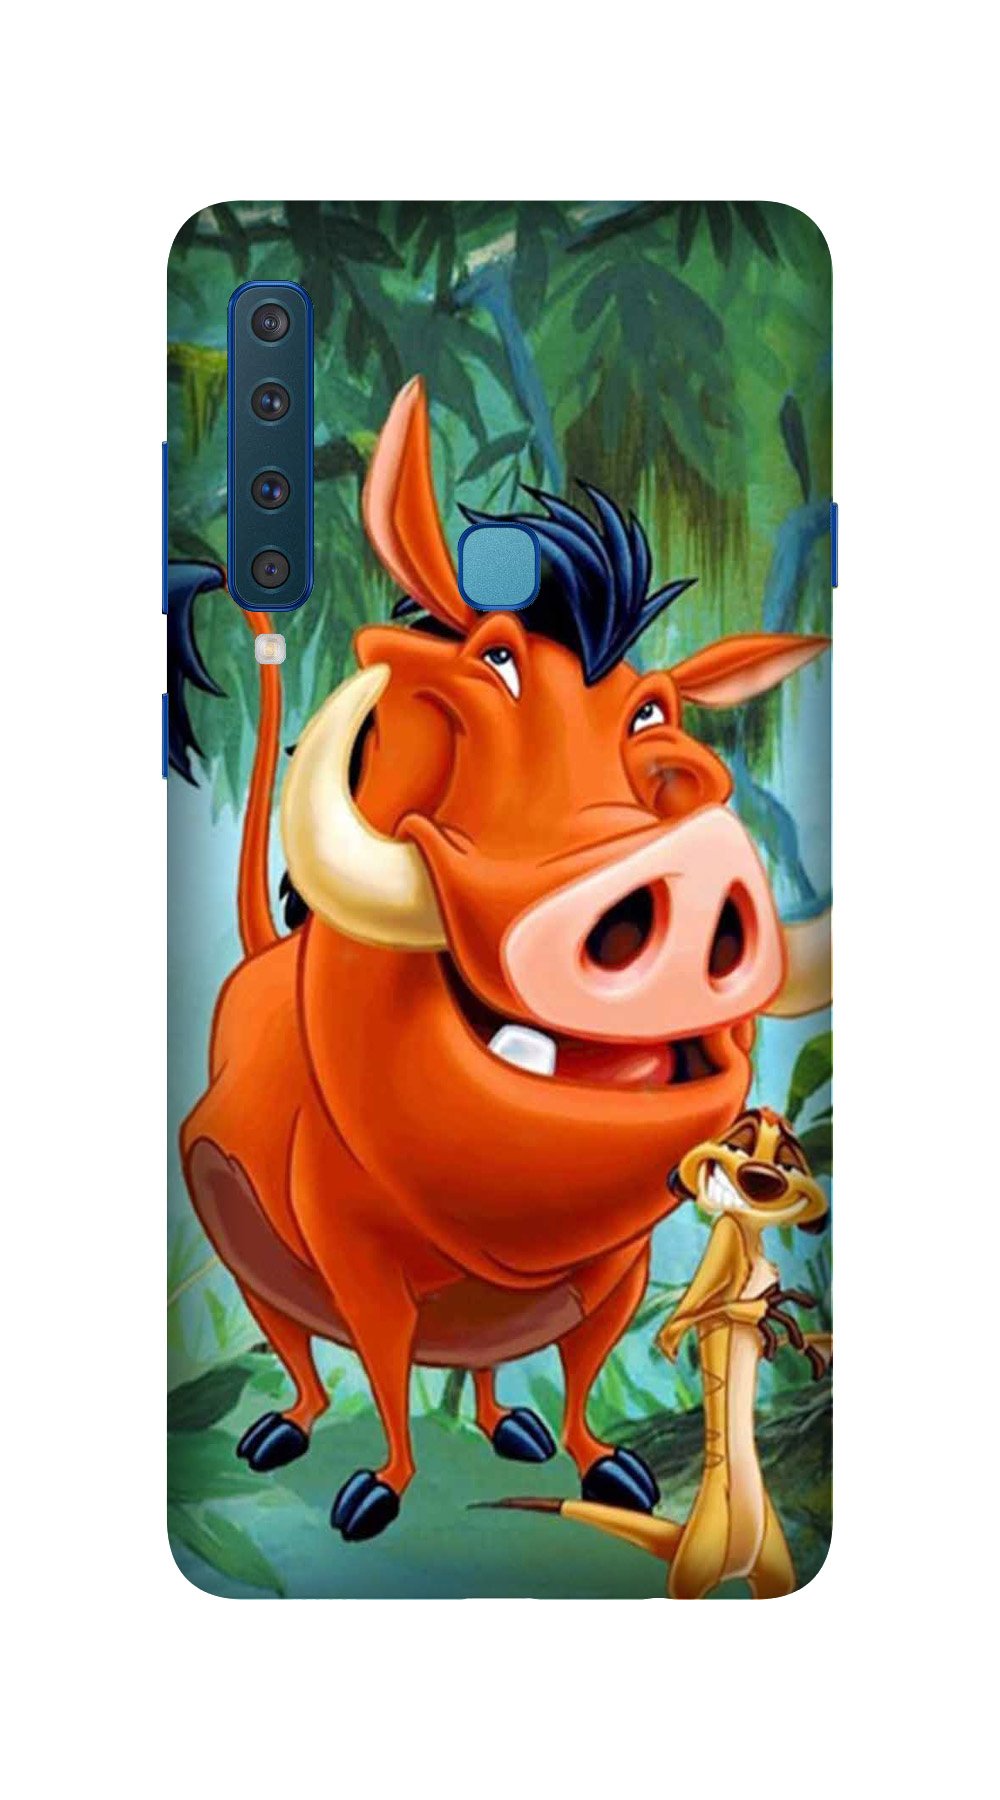 Timon and Pumbaa Mobile Back Case for Galaxy A9 2018 (Design - 305)